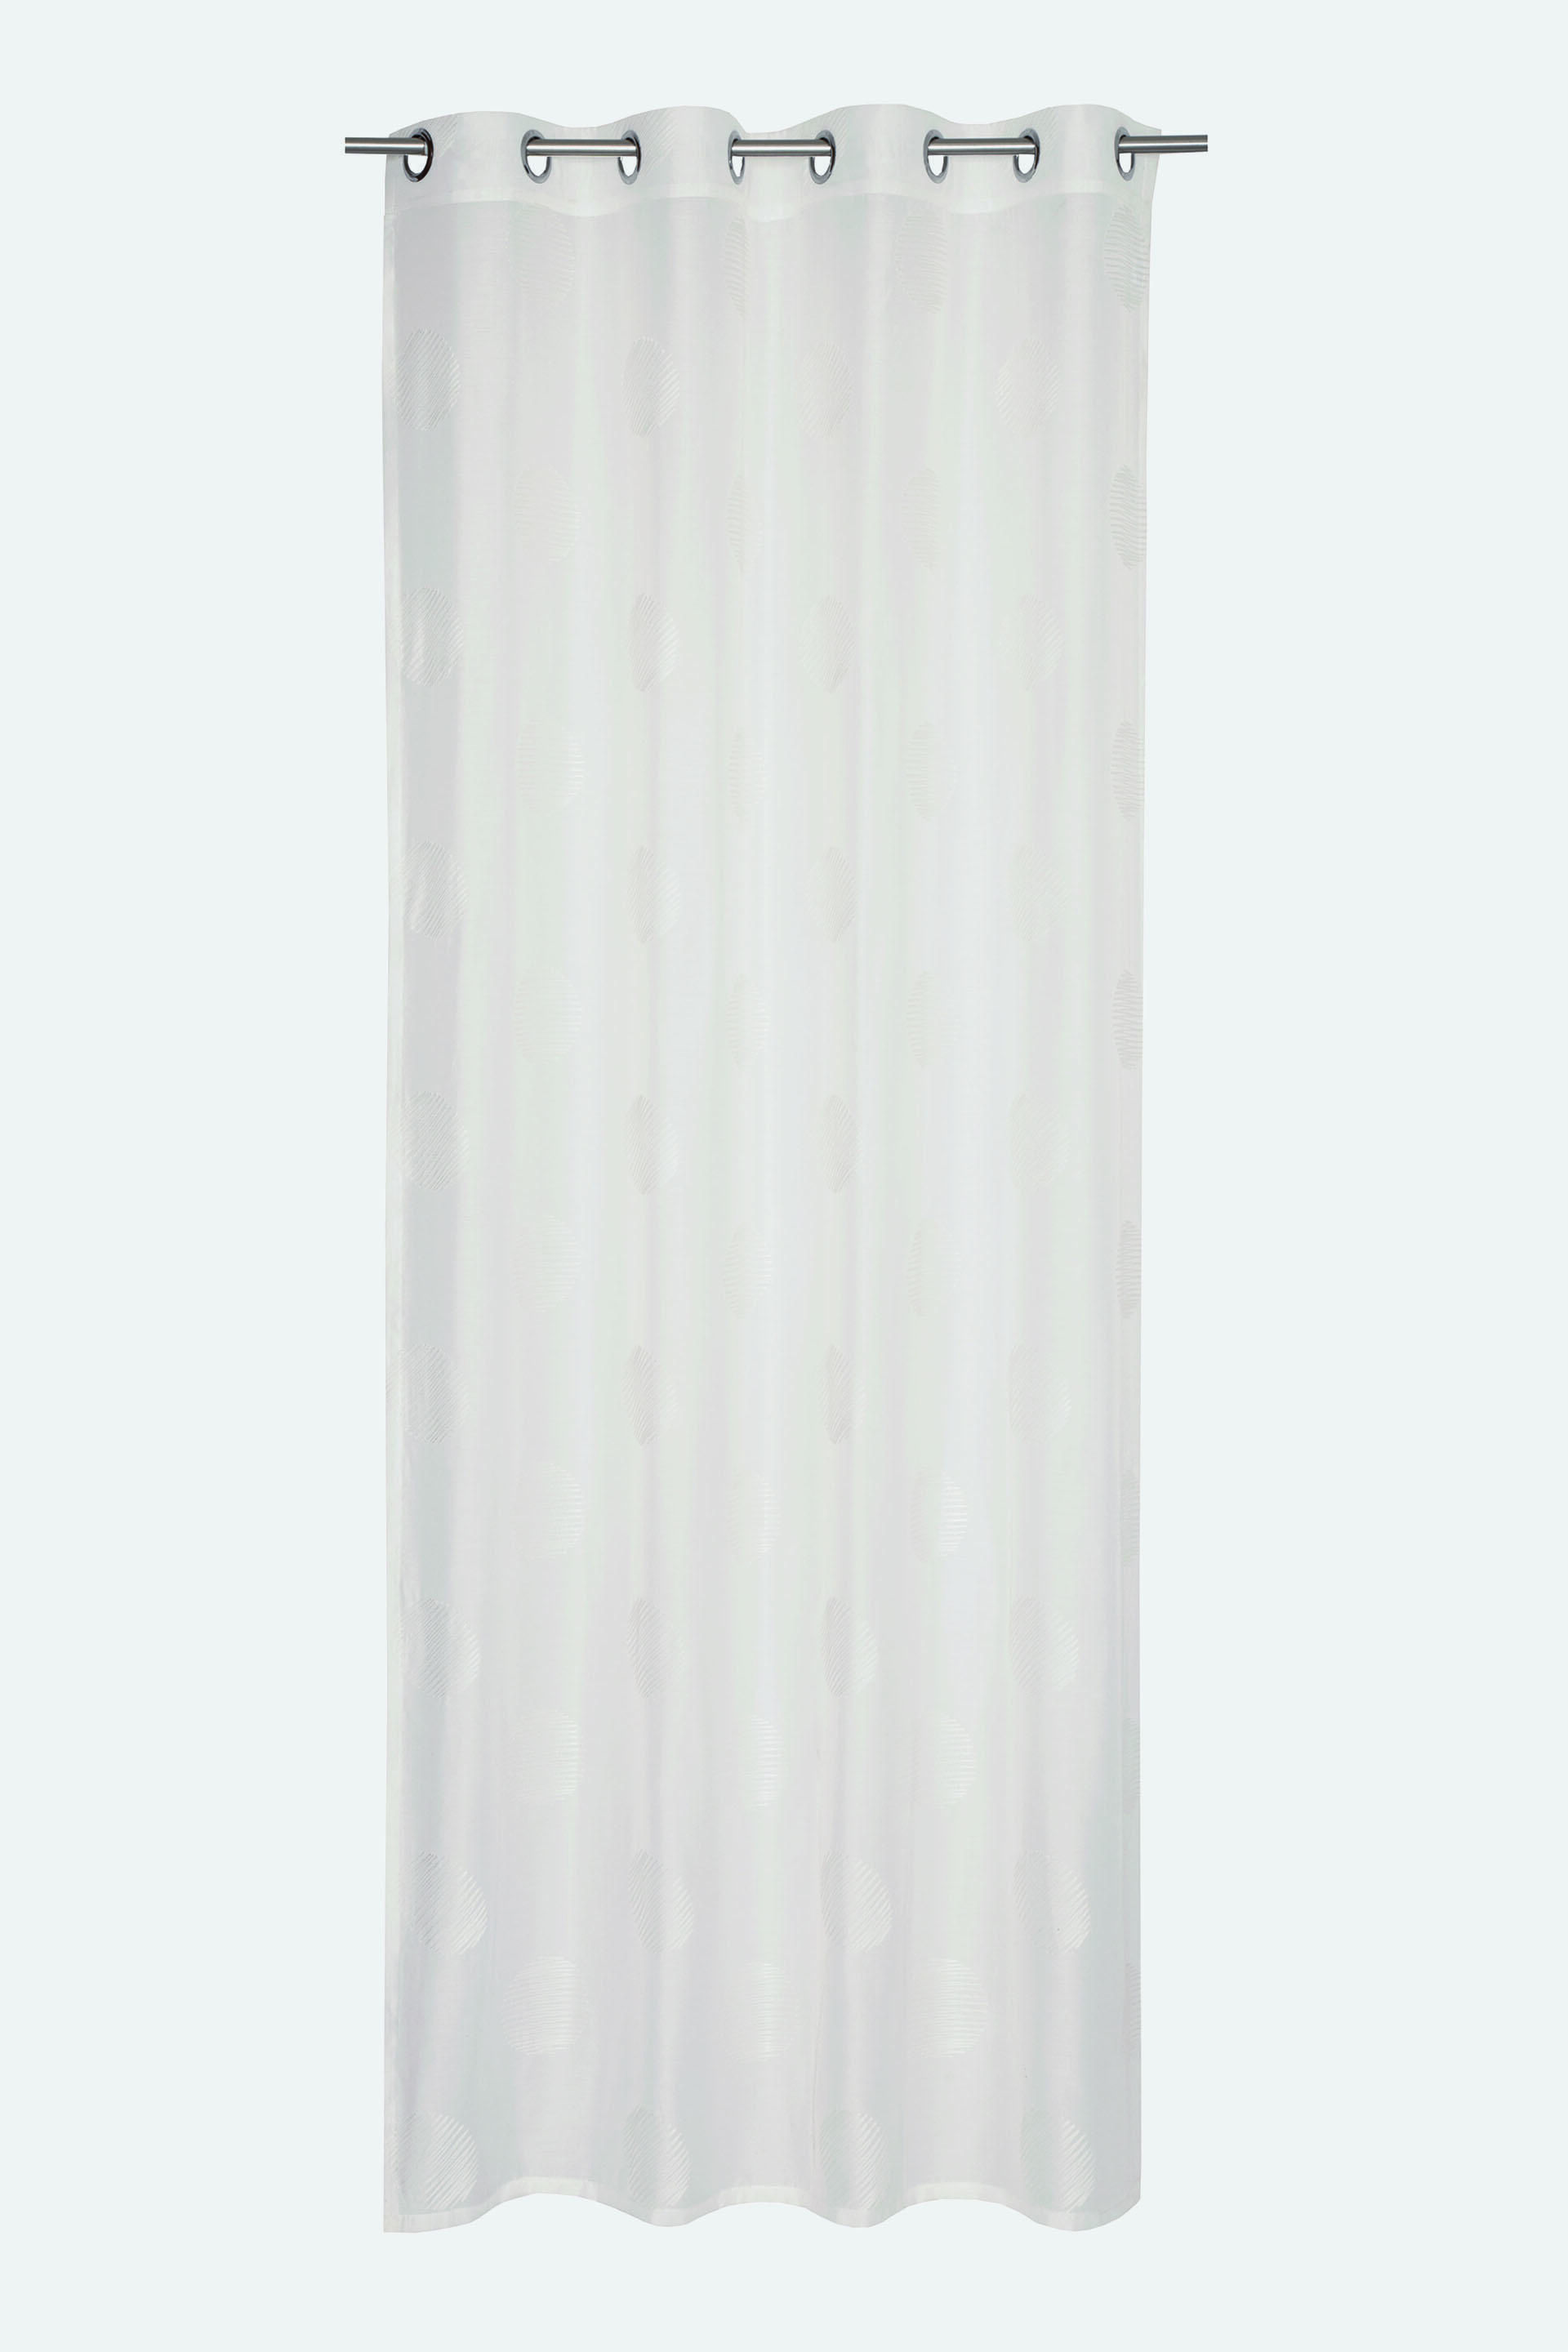 Esprit with eyelet curtain embroidery Sheer